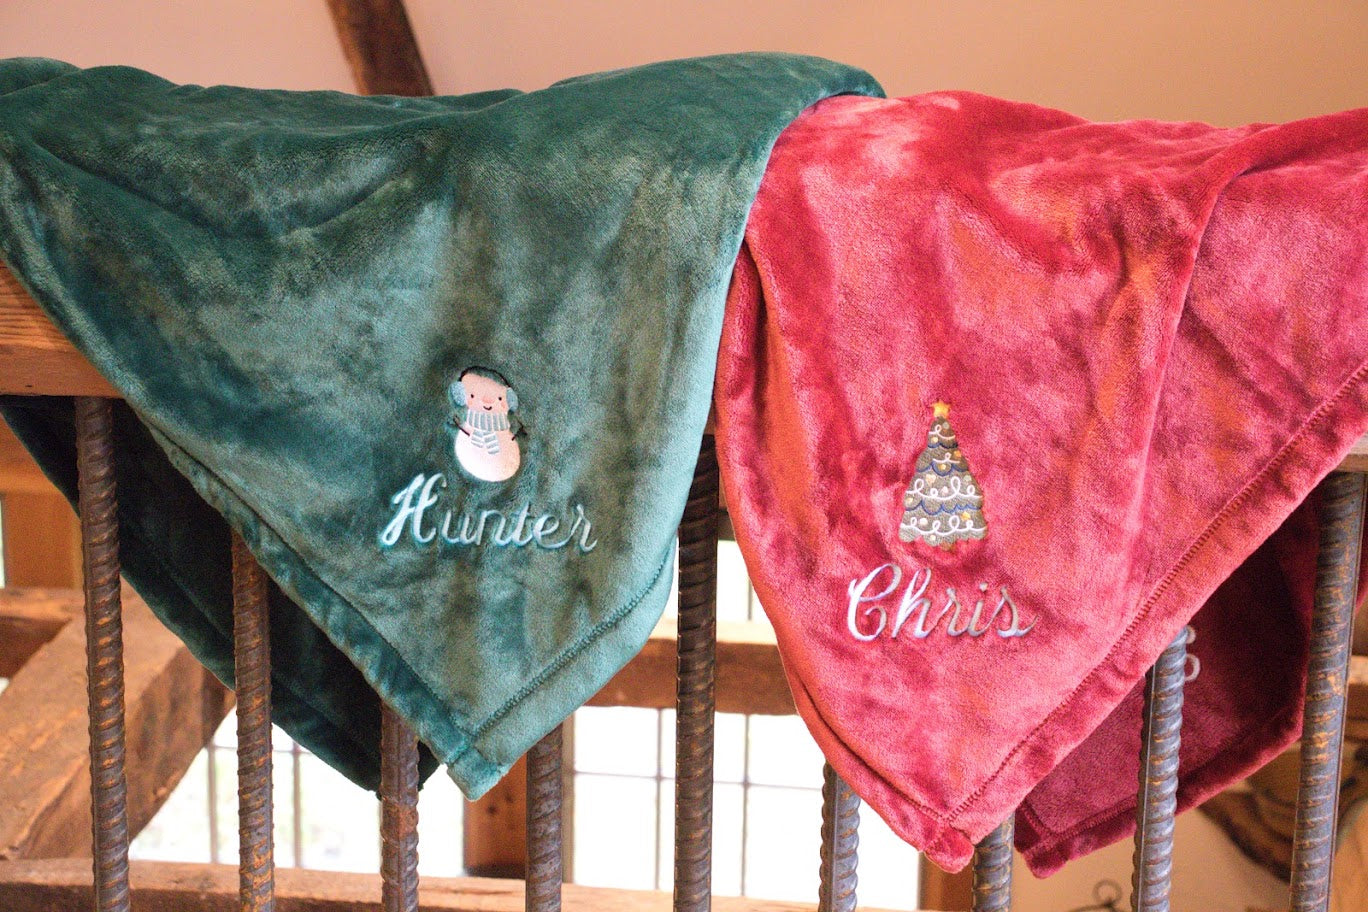 Personalized Blankets, Embroidered, Monogrammed and Customized with Your Special Touch.